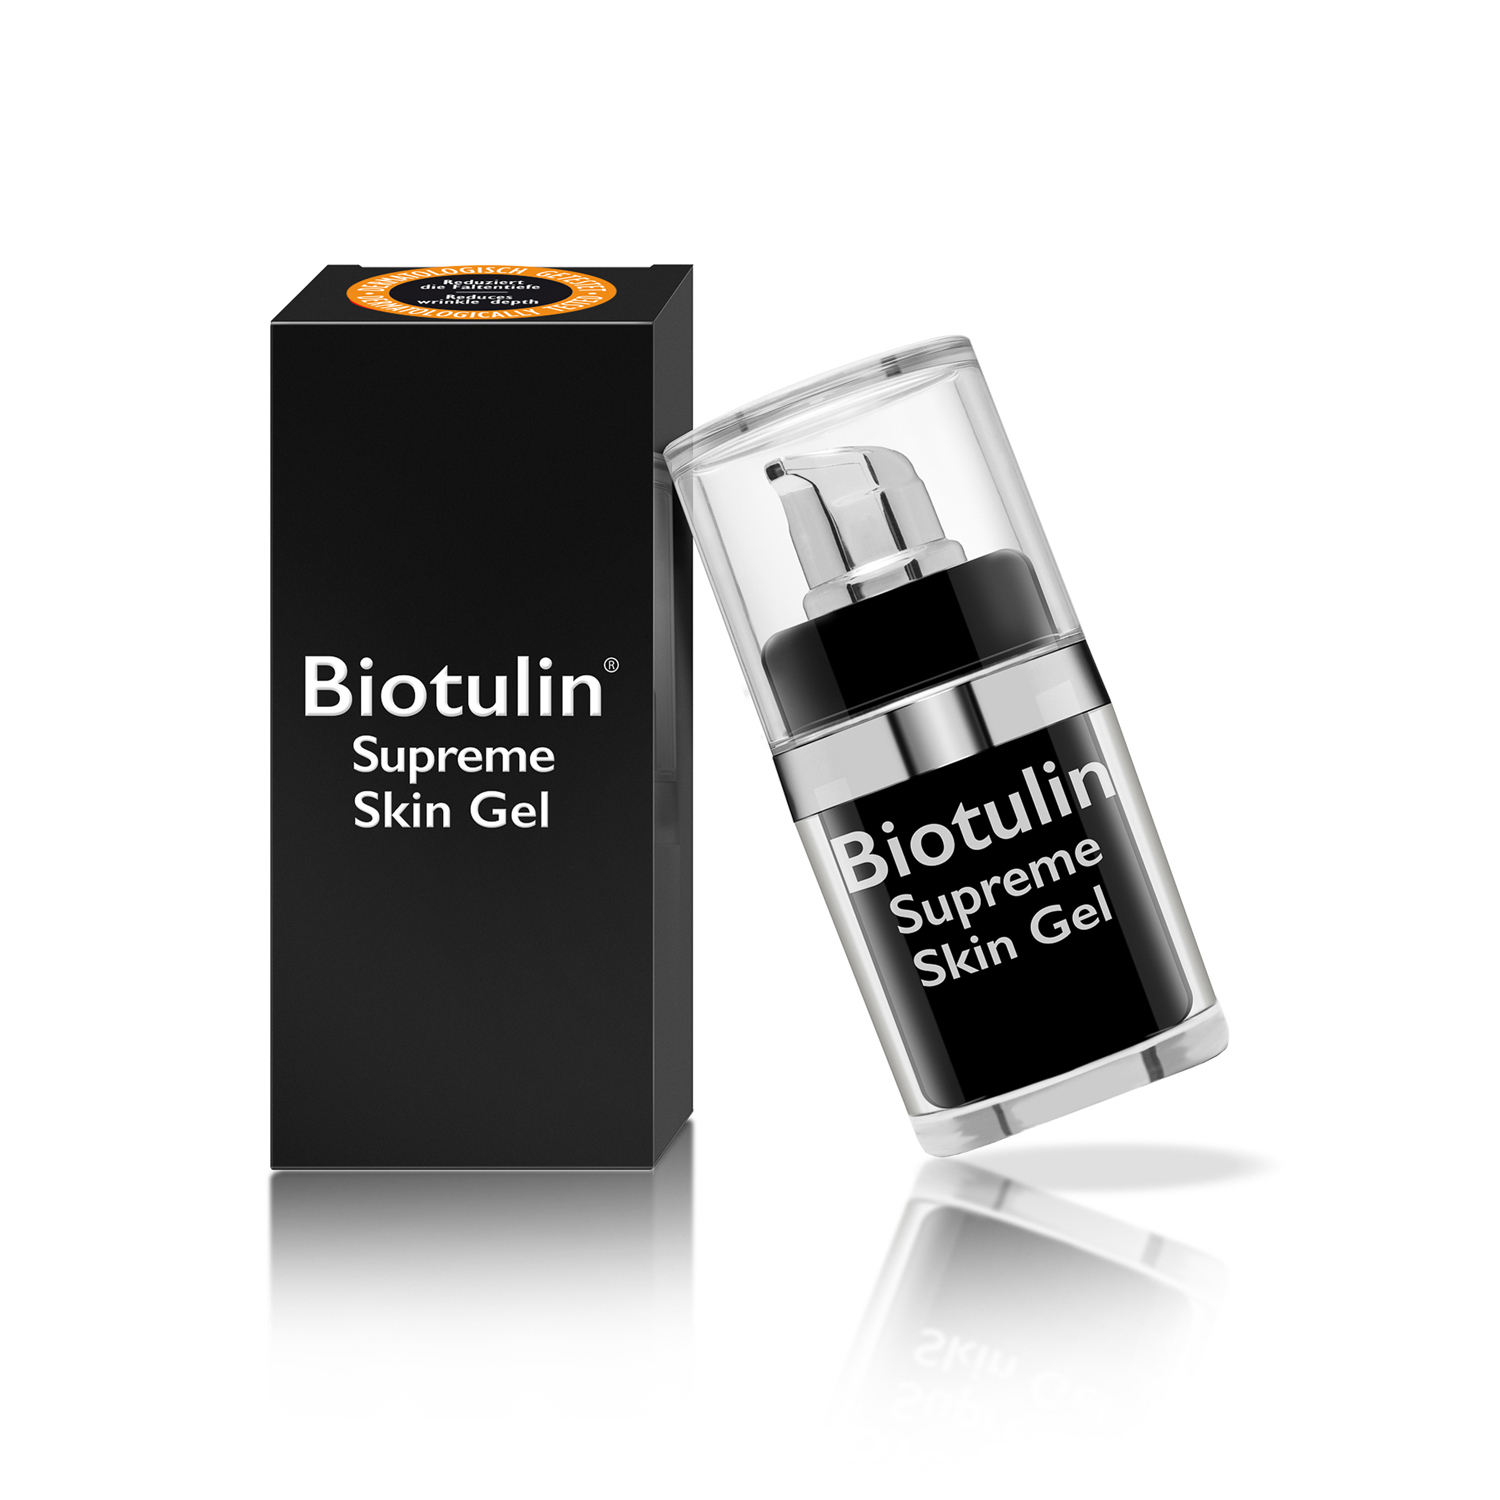 G-Beauty Biotulin is the beauty hype of the year